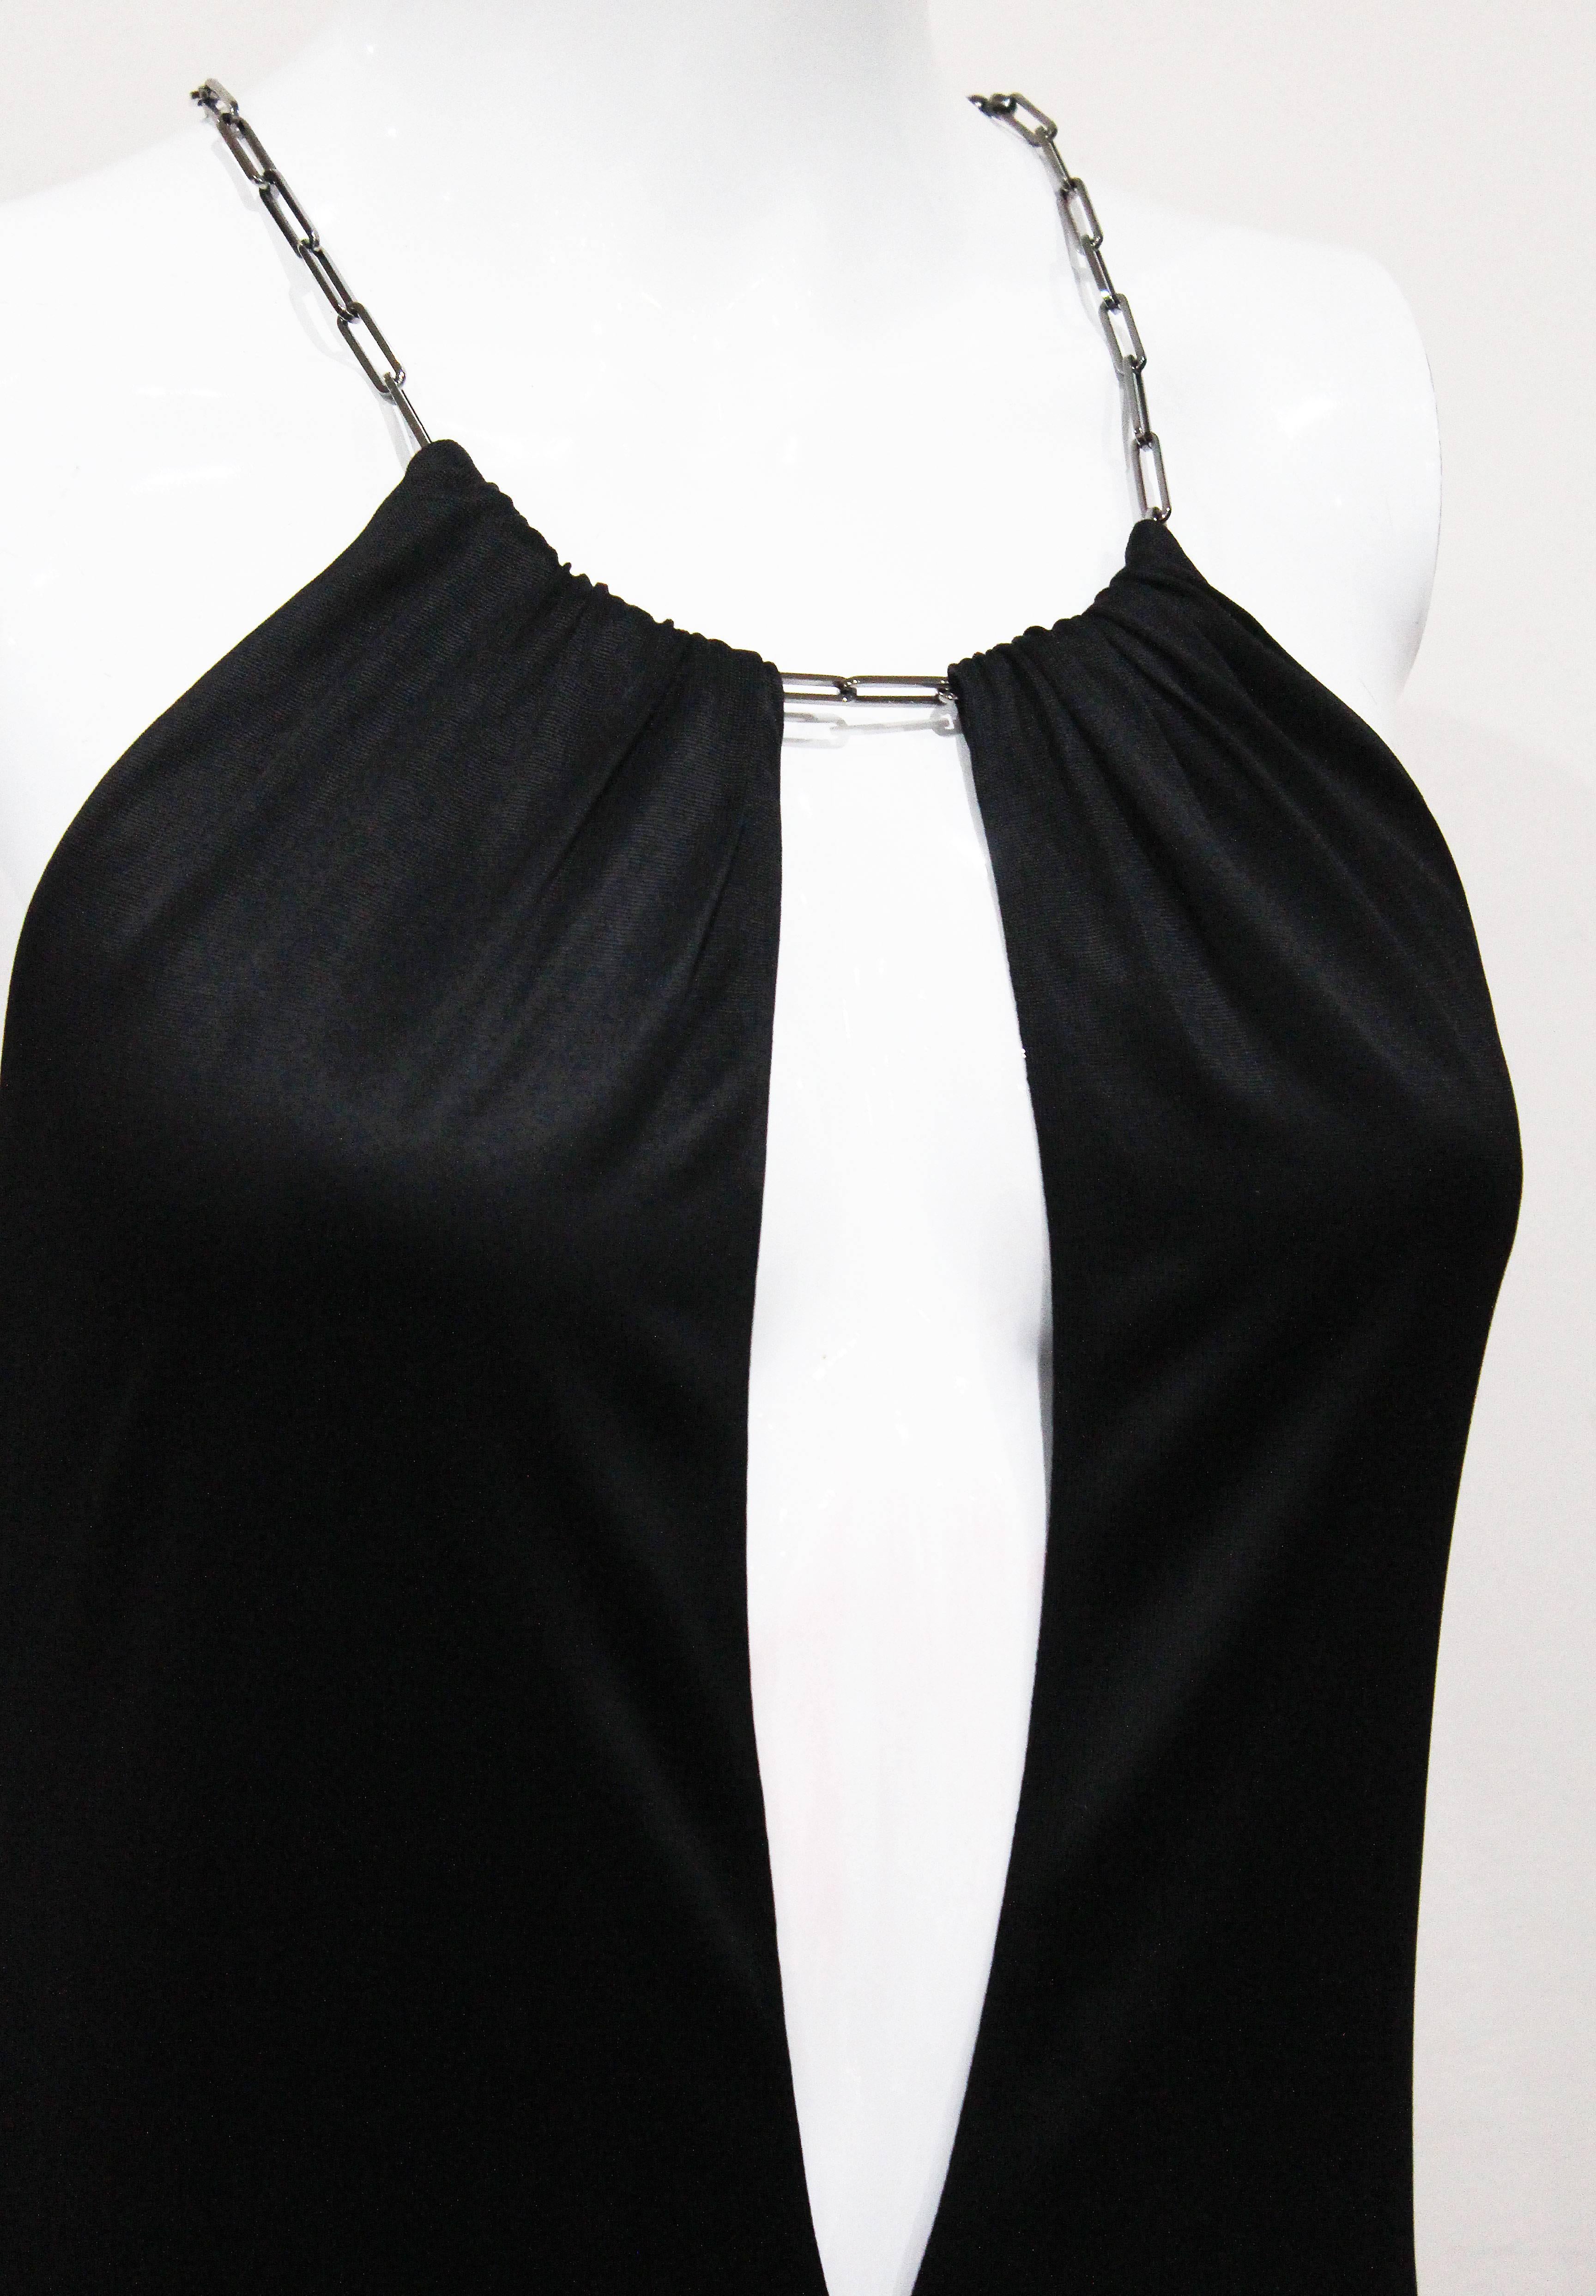 A Tom Ford for Gucci black jersey dress from the Spring/Summer 2000 collection. The dress hangs off a metal silver chain necklace and has a deep plunge at the front. 

Italian 38 / French 34 / UK 6 / XS